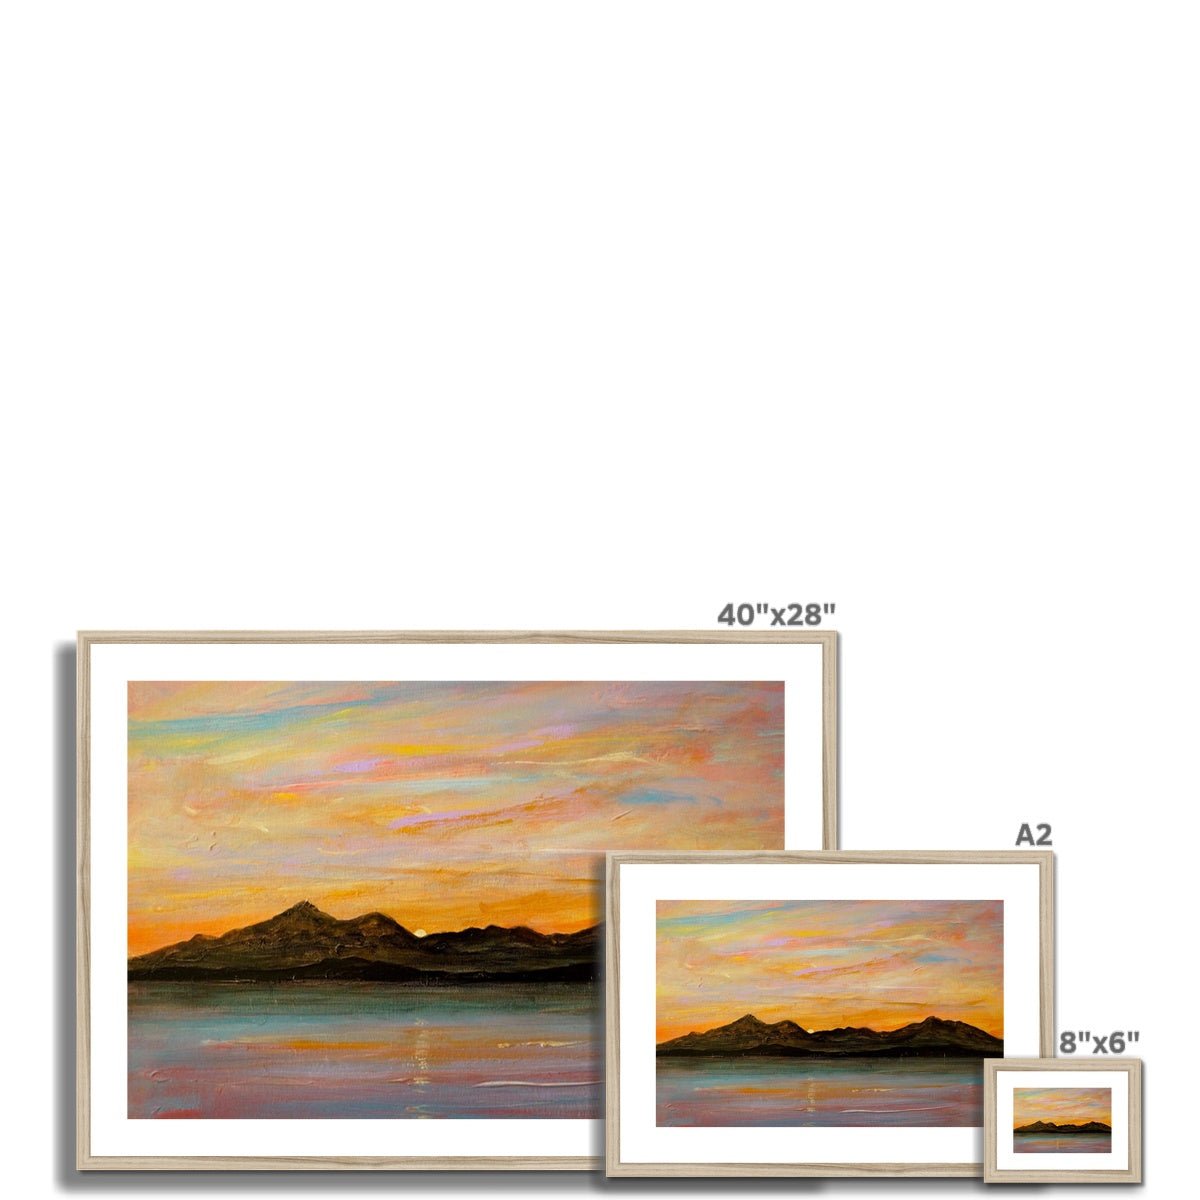 The Sleeping Warrior Arran Painting | Framed & Mounted Prints From Scotland-Framed & Mounted Prints-Arran Art Gallery-Paintings, Prints, Homeware, Art Gifts From Scotland By Scottish Artist Kevin Hunter